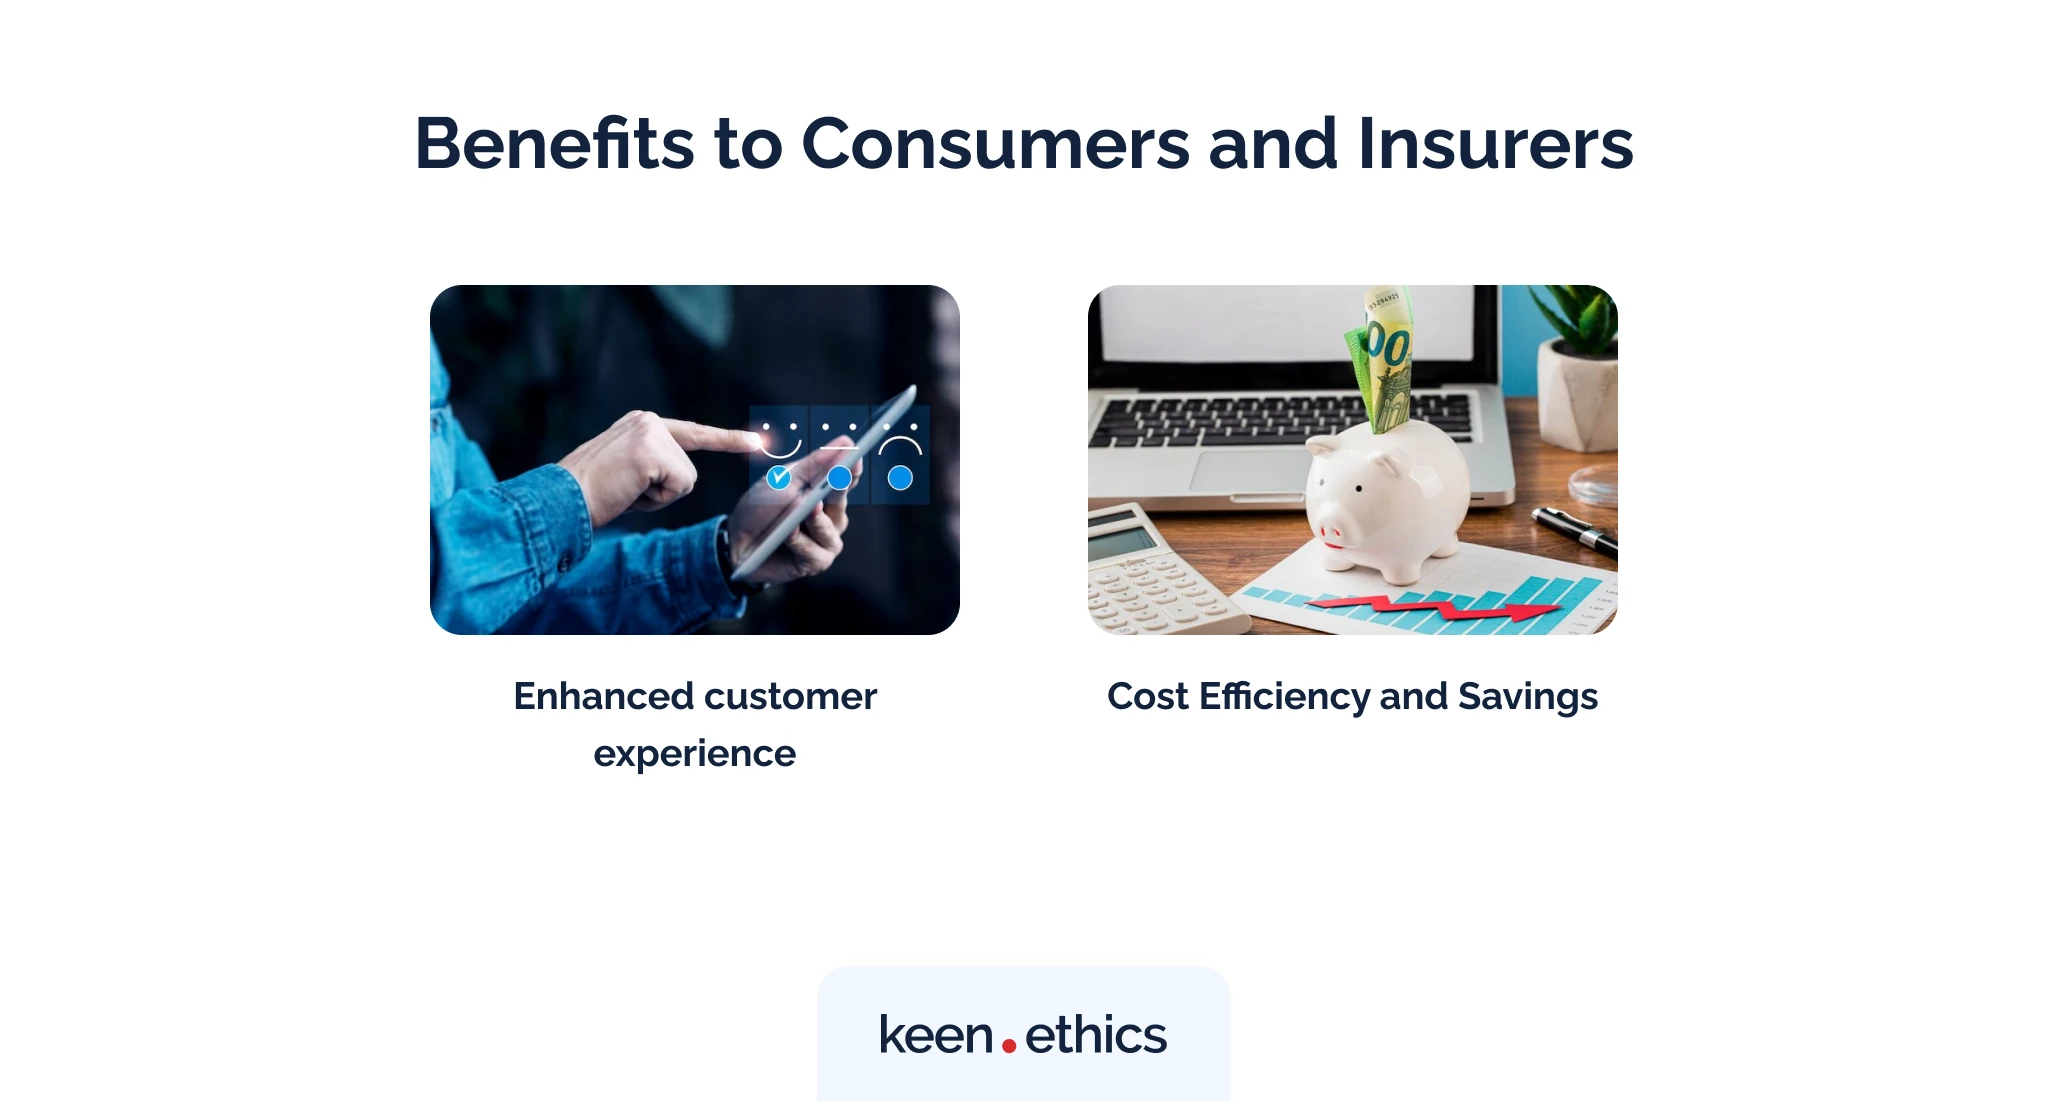 Benefits to consumers